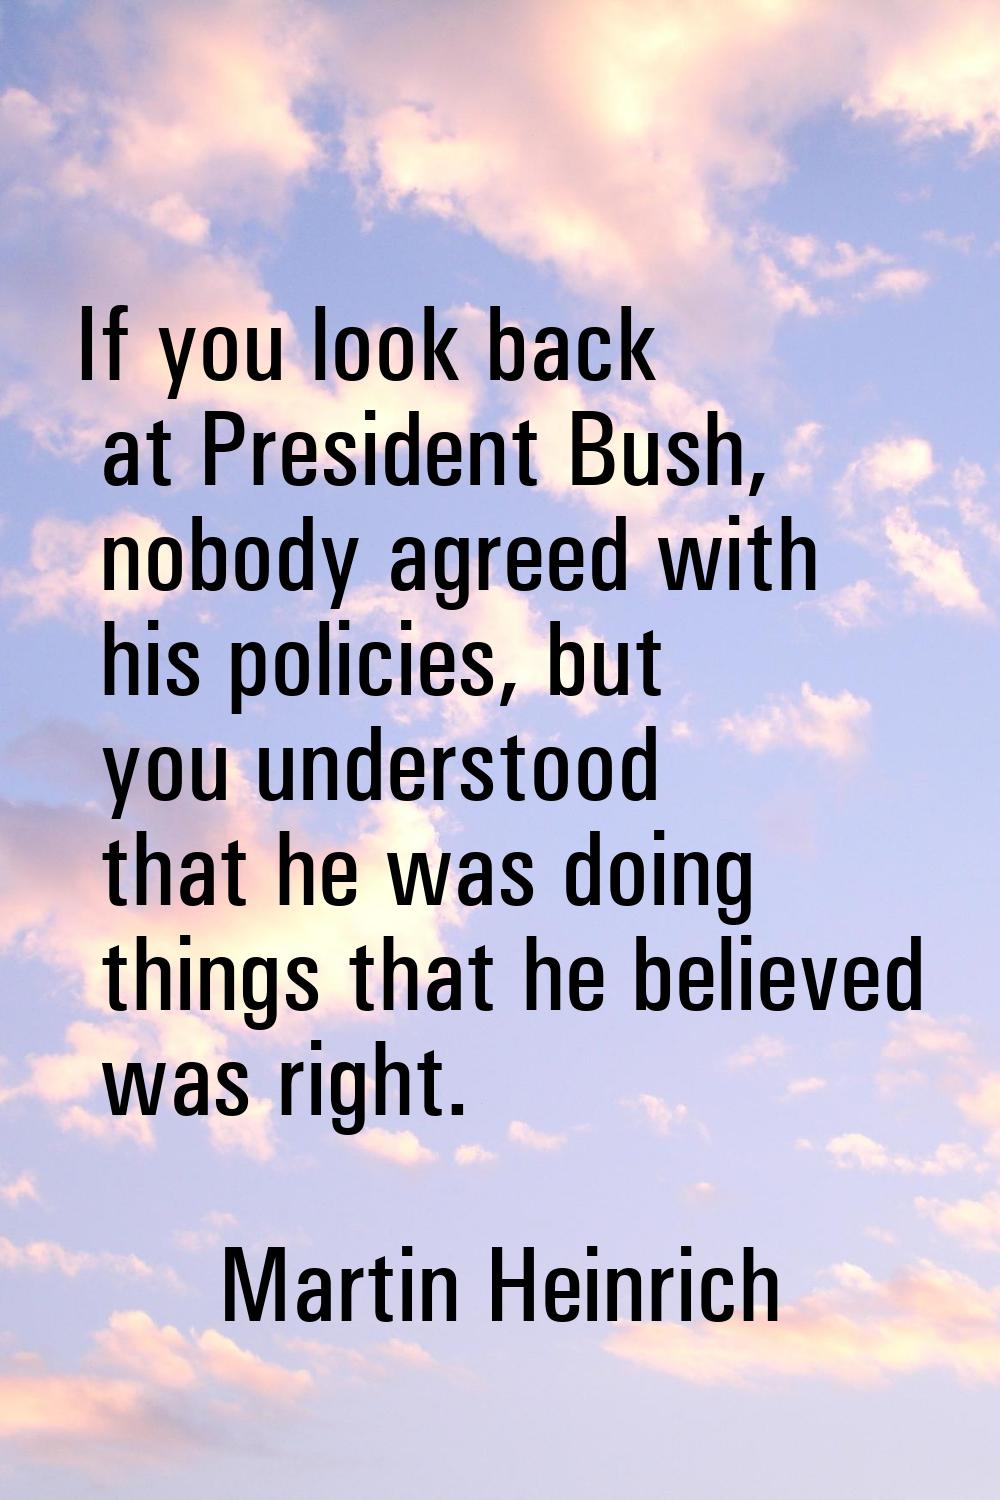 If you look back at President Bush, nobody agreed with his policies, but you understood that he was